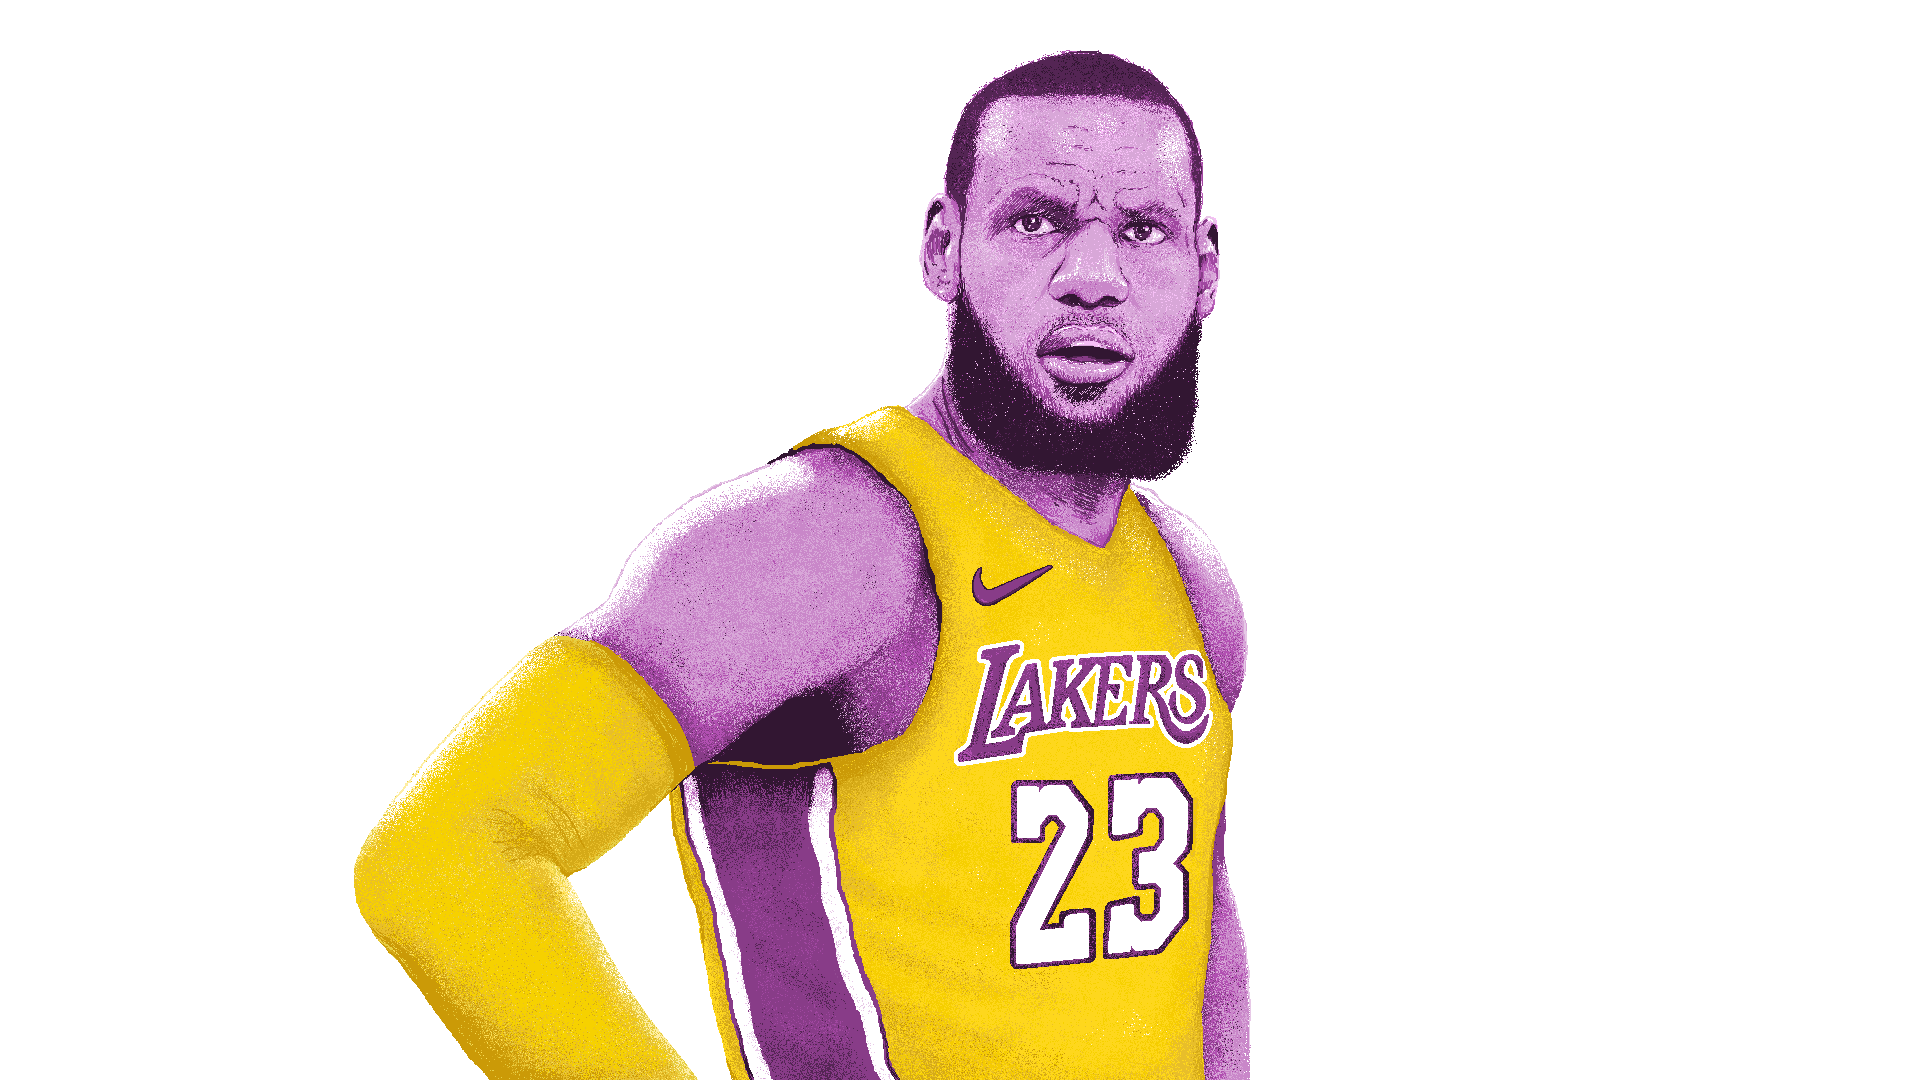 ORDER NOW The KING Lebron James T-shirt by MolkiStore on DeviantArt